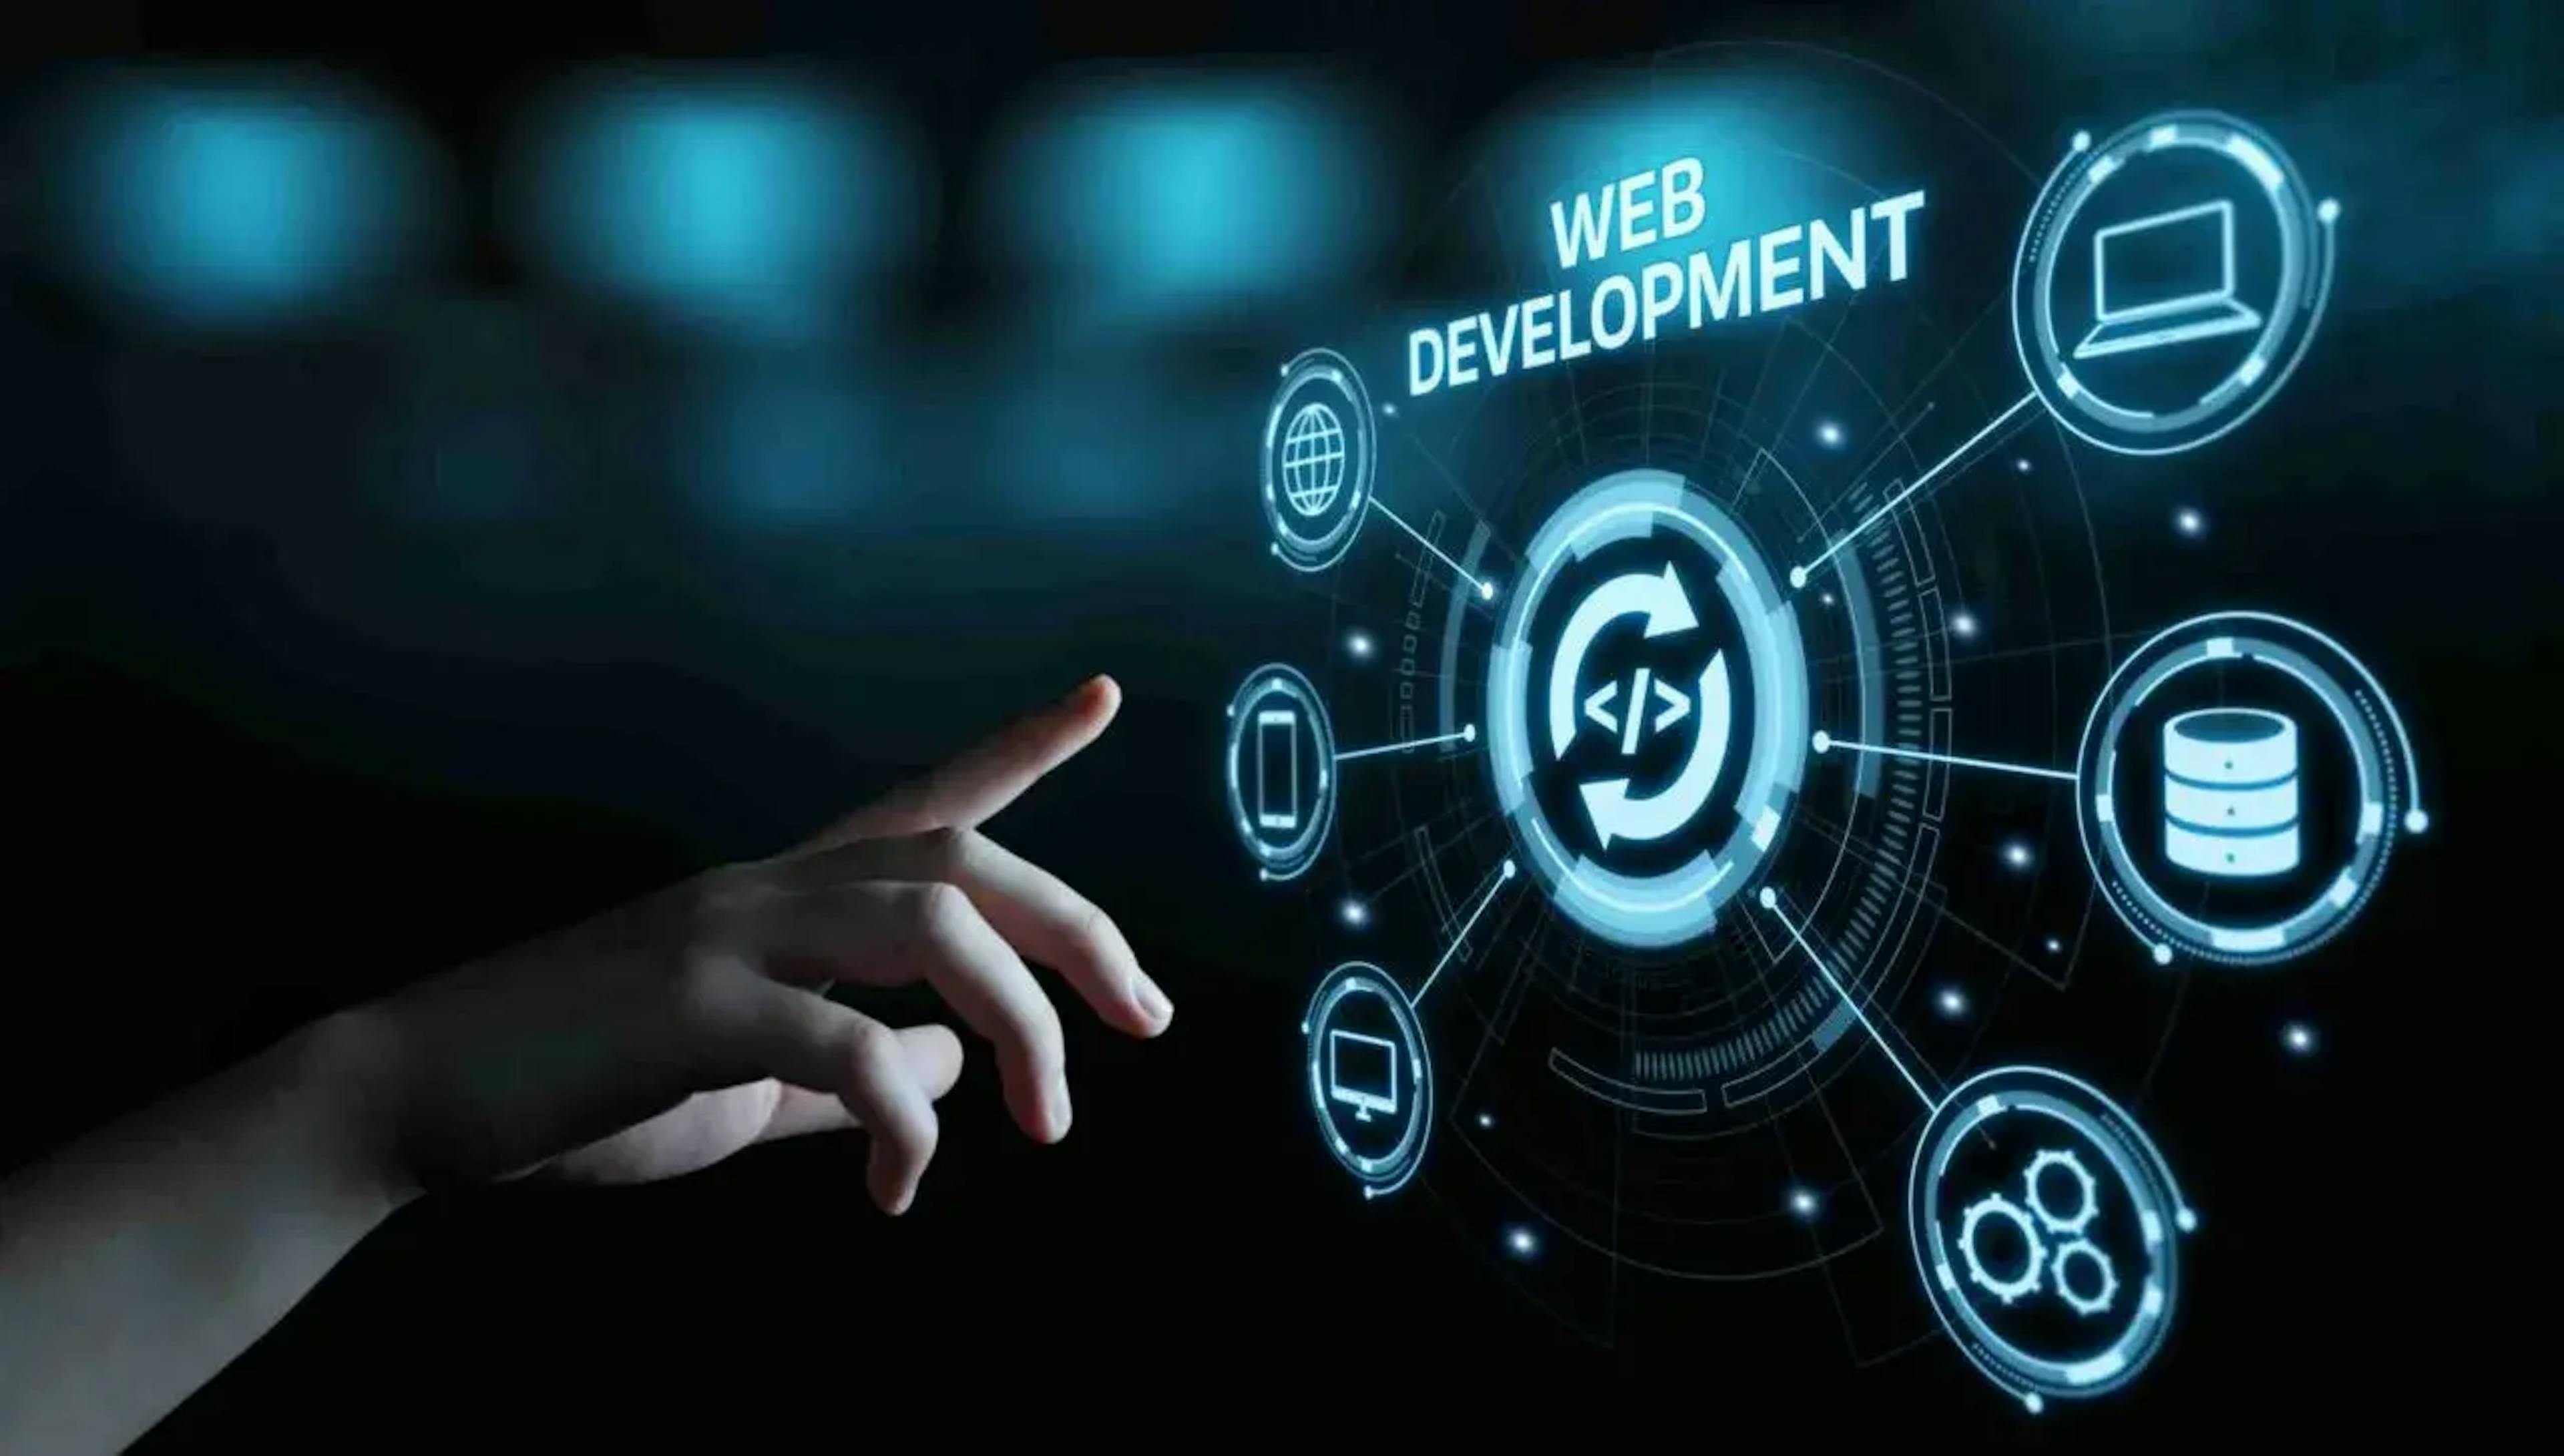 Searching through the web development frameworks to hire web developers